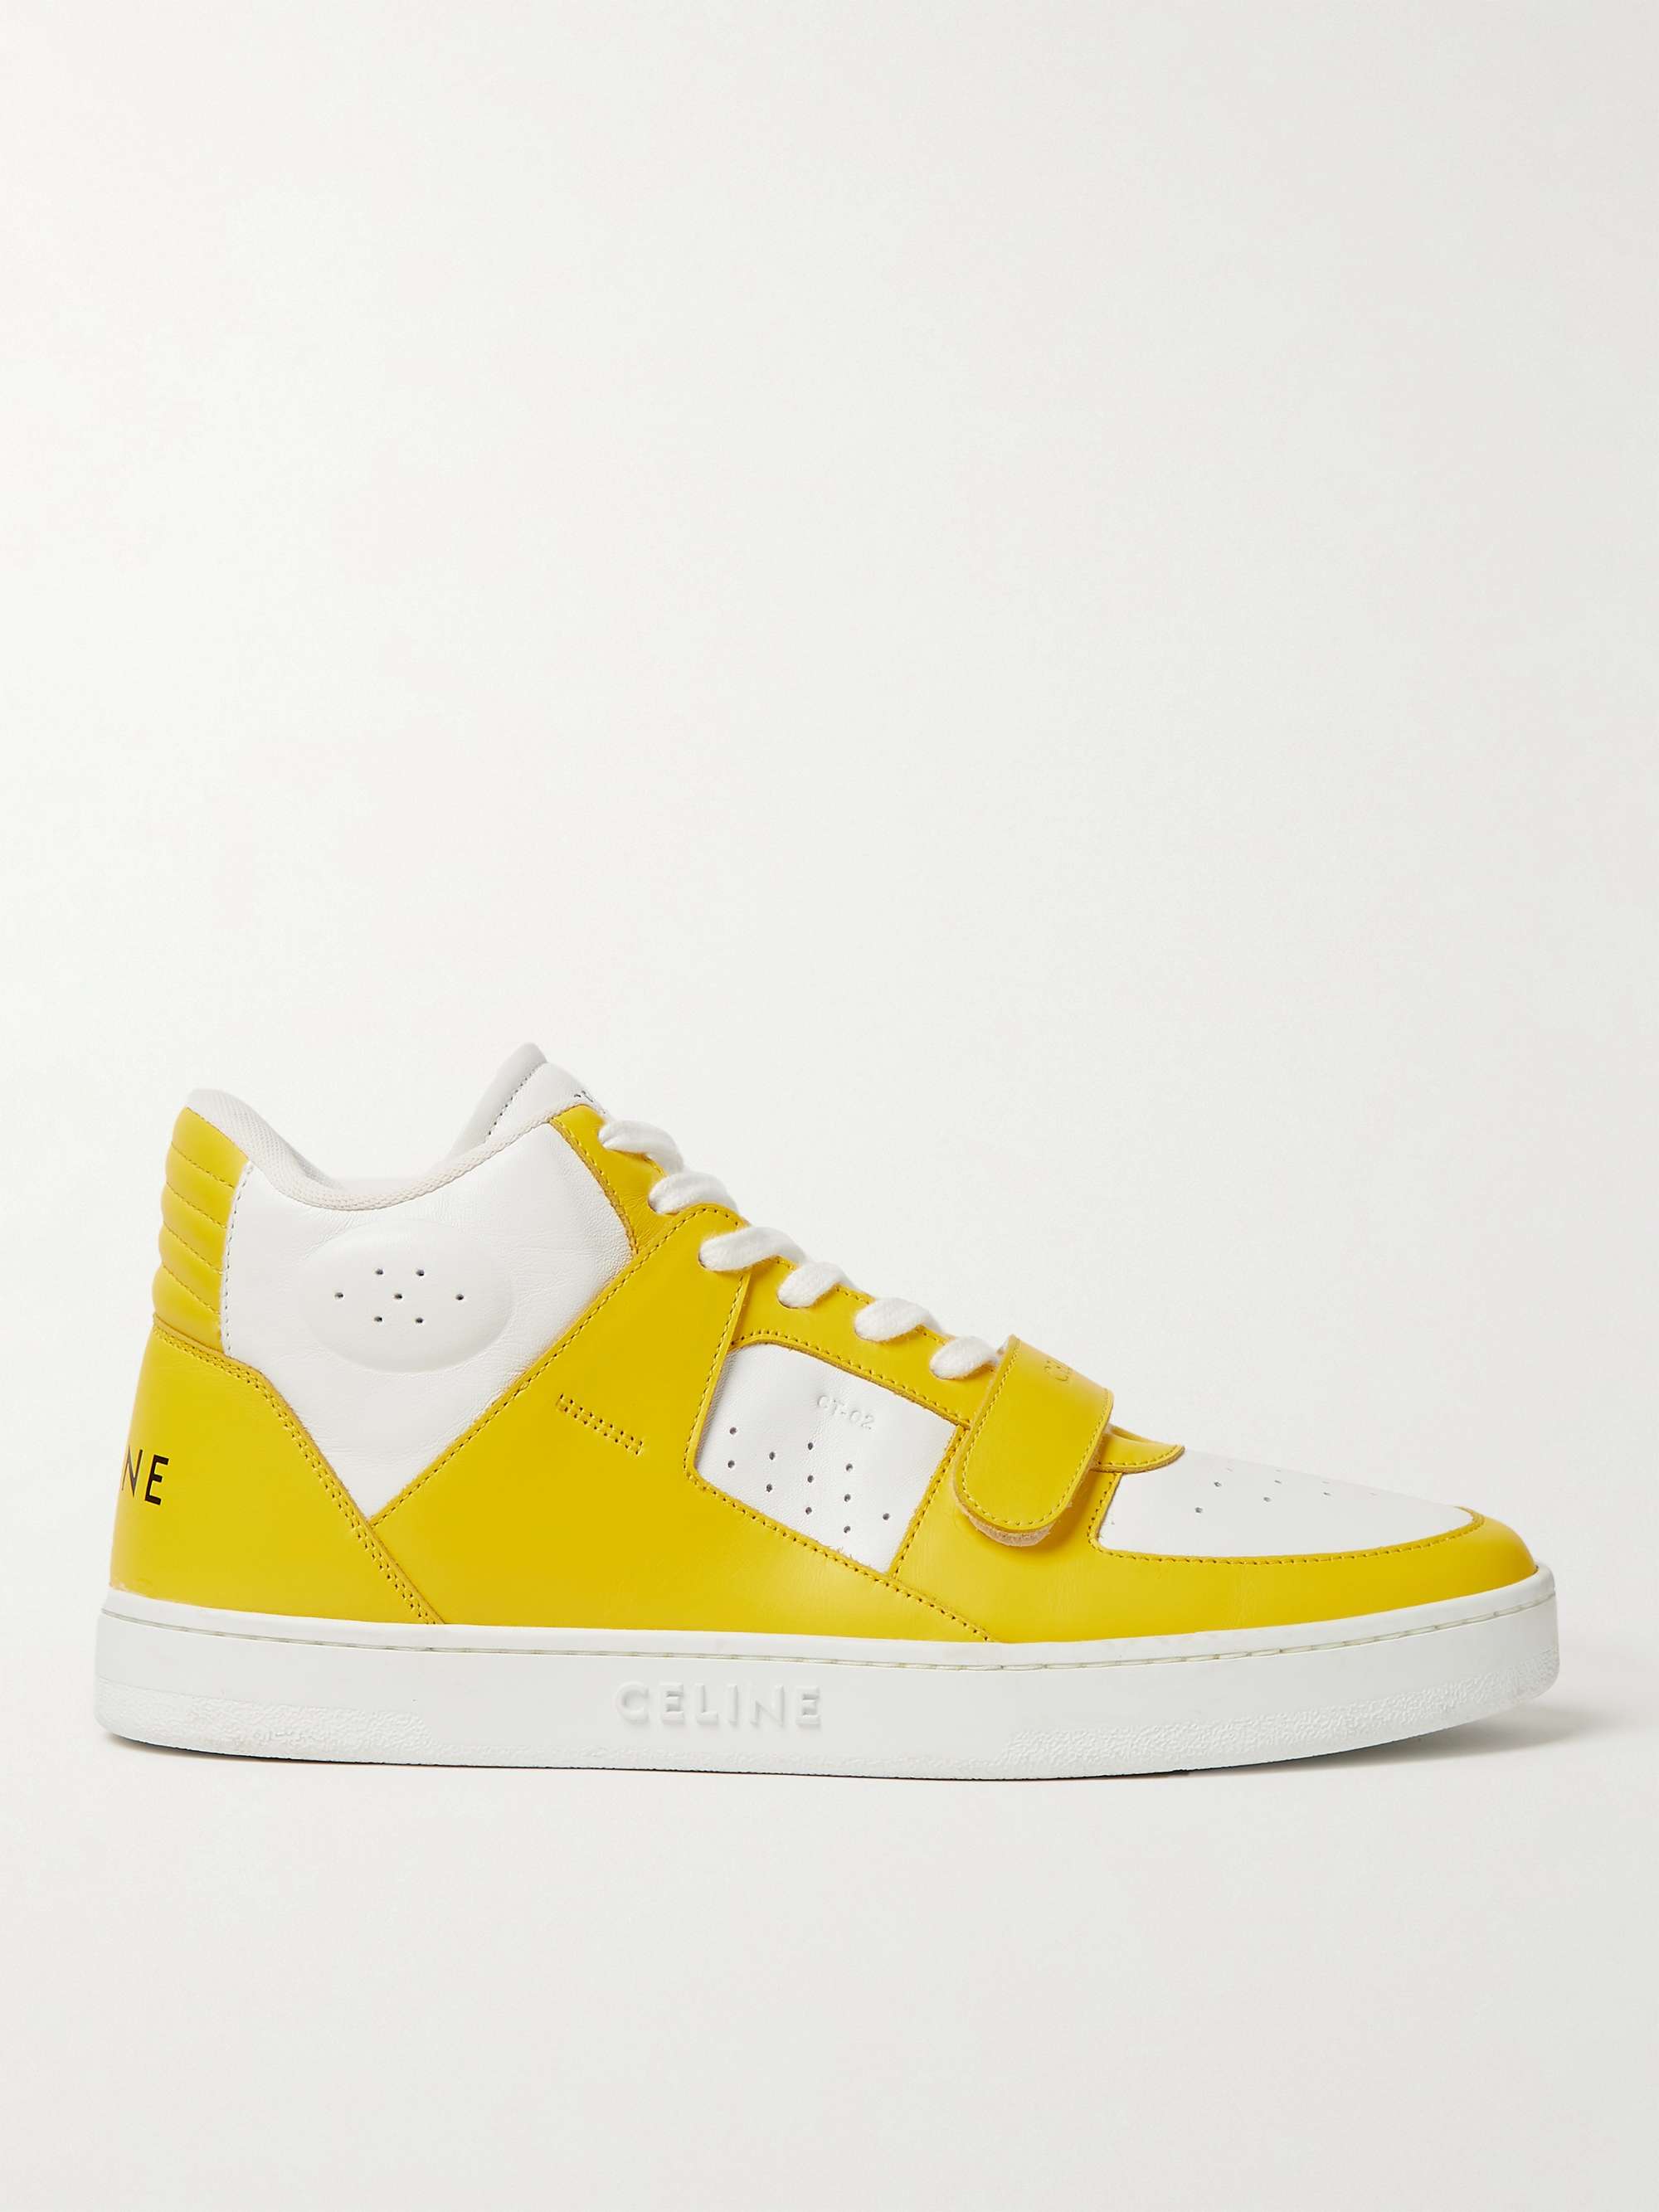 CELINE HOMME CT-02 Colour-Block Leather High-Top Sneakers